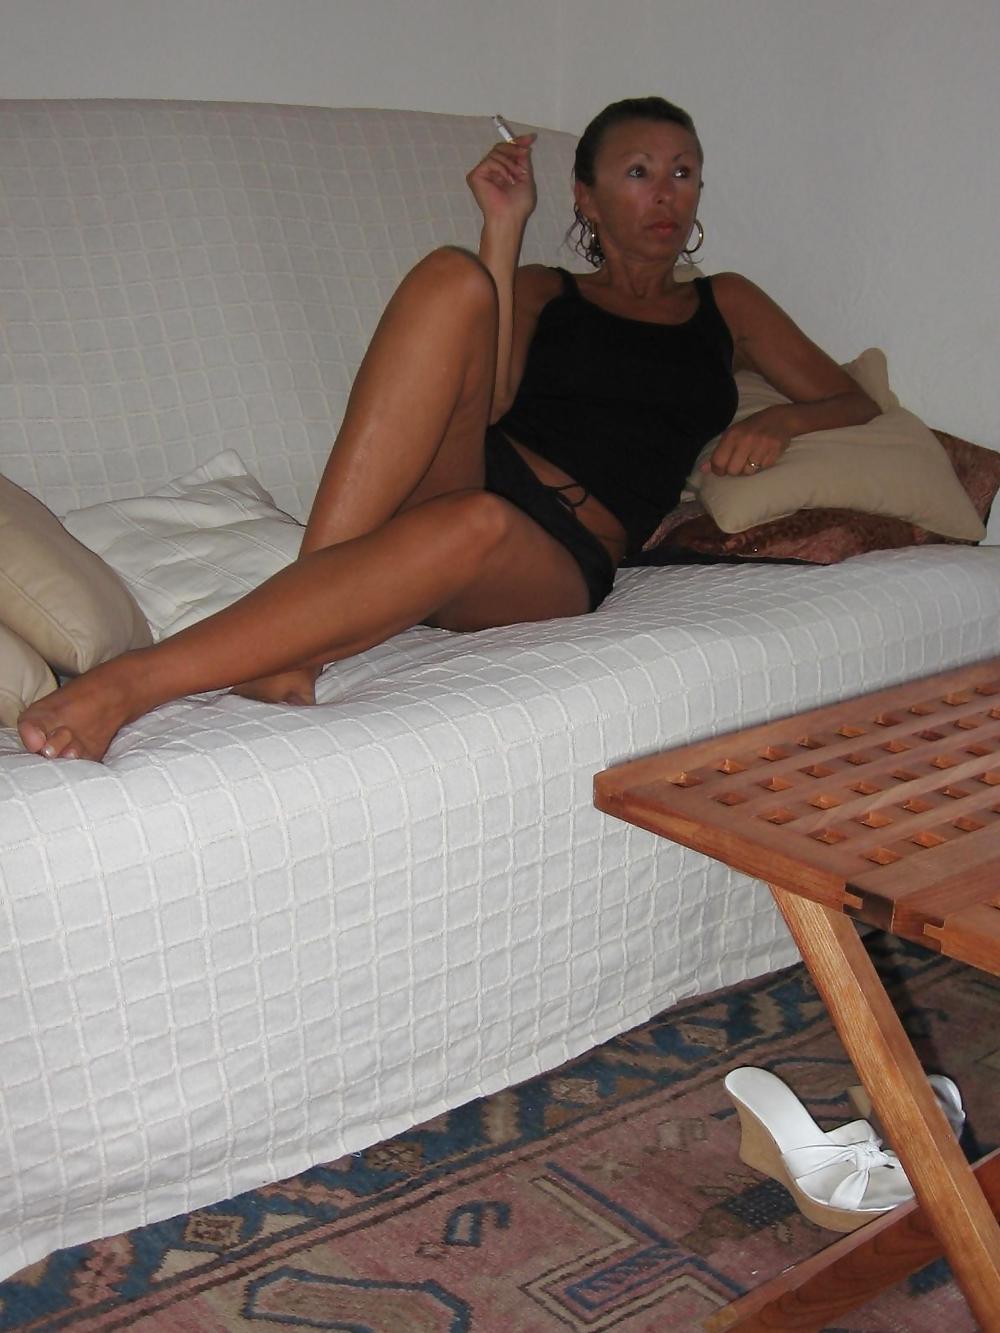 FANTASTIC MILF - SEXY AND HOT I #7007111